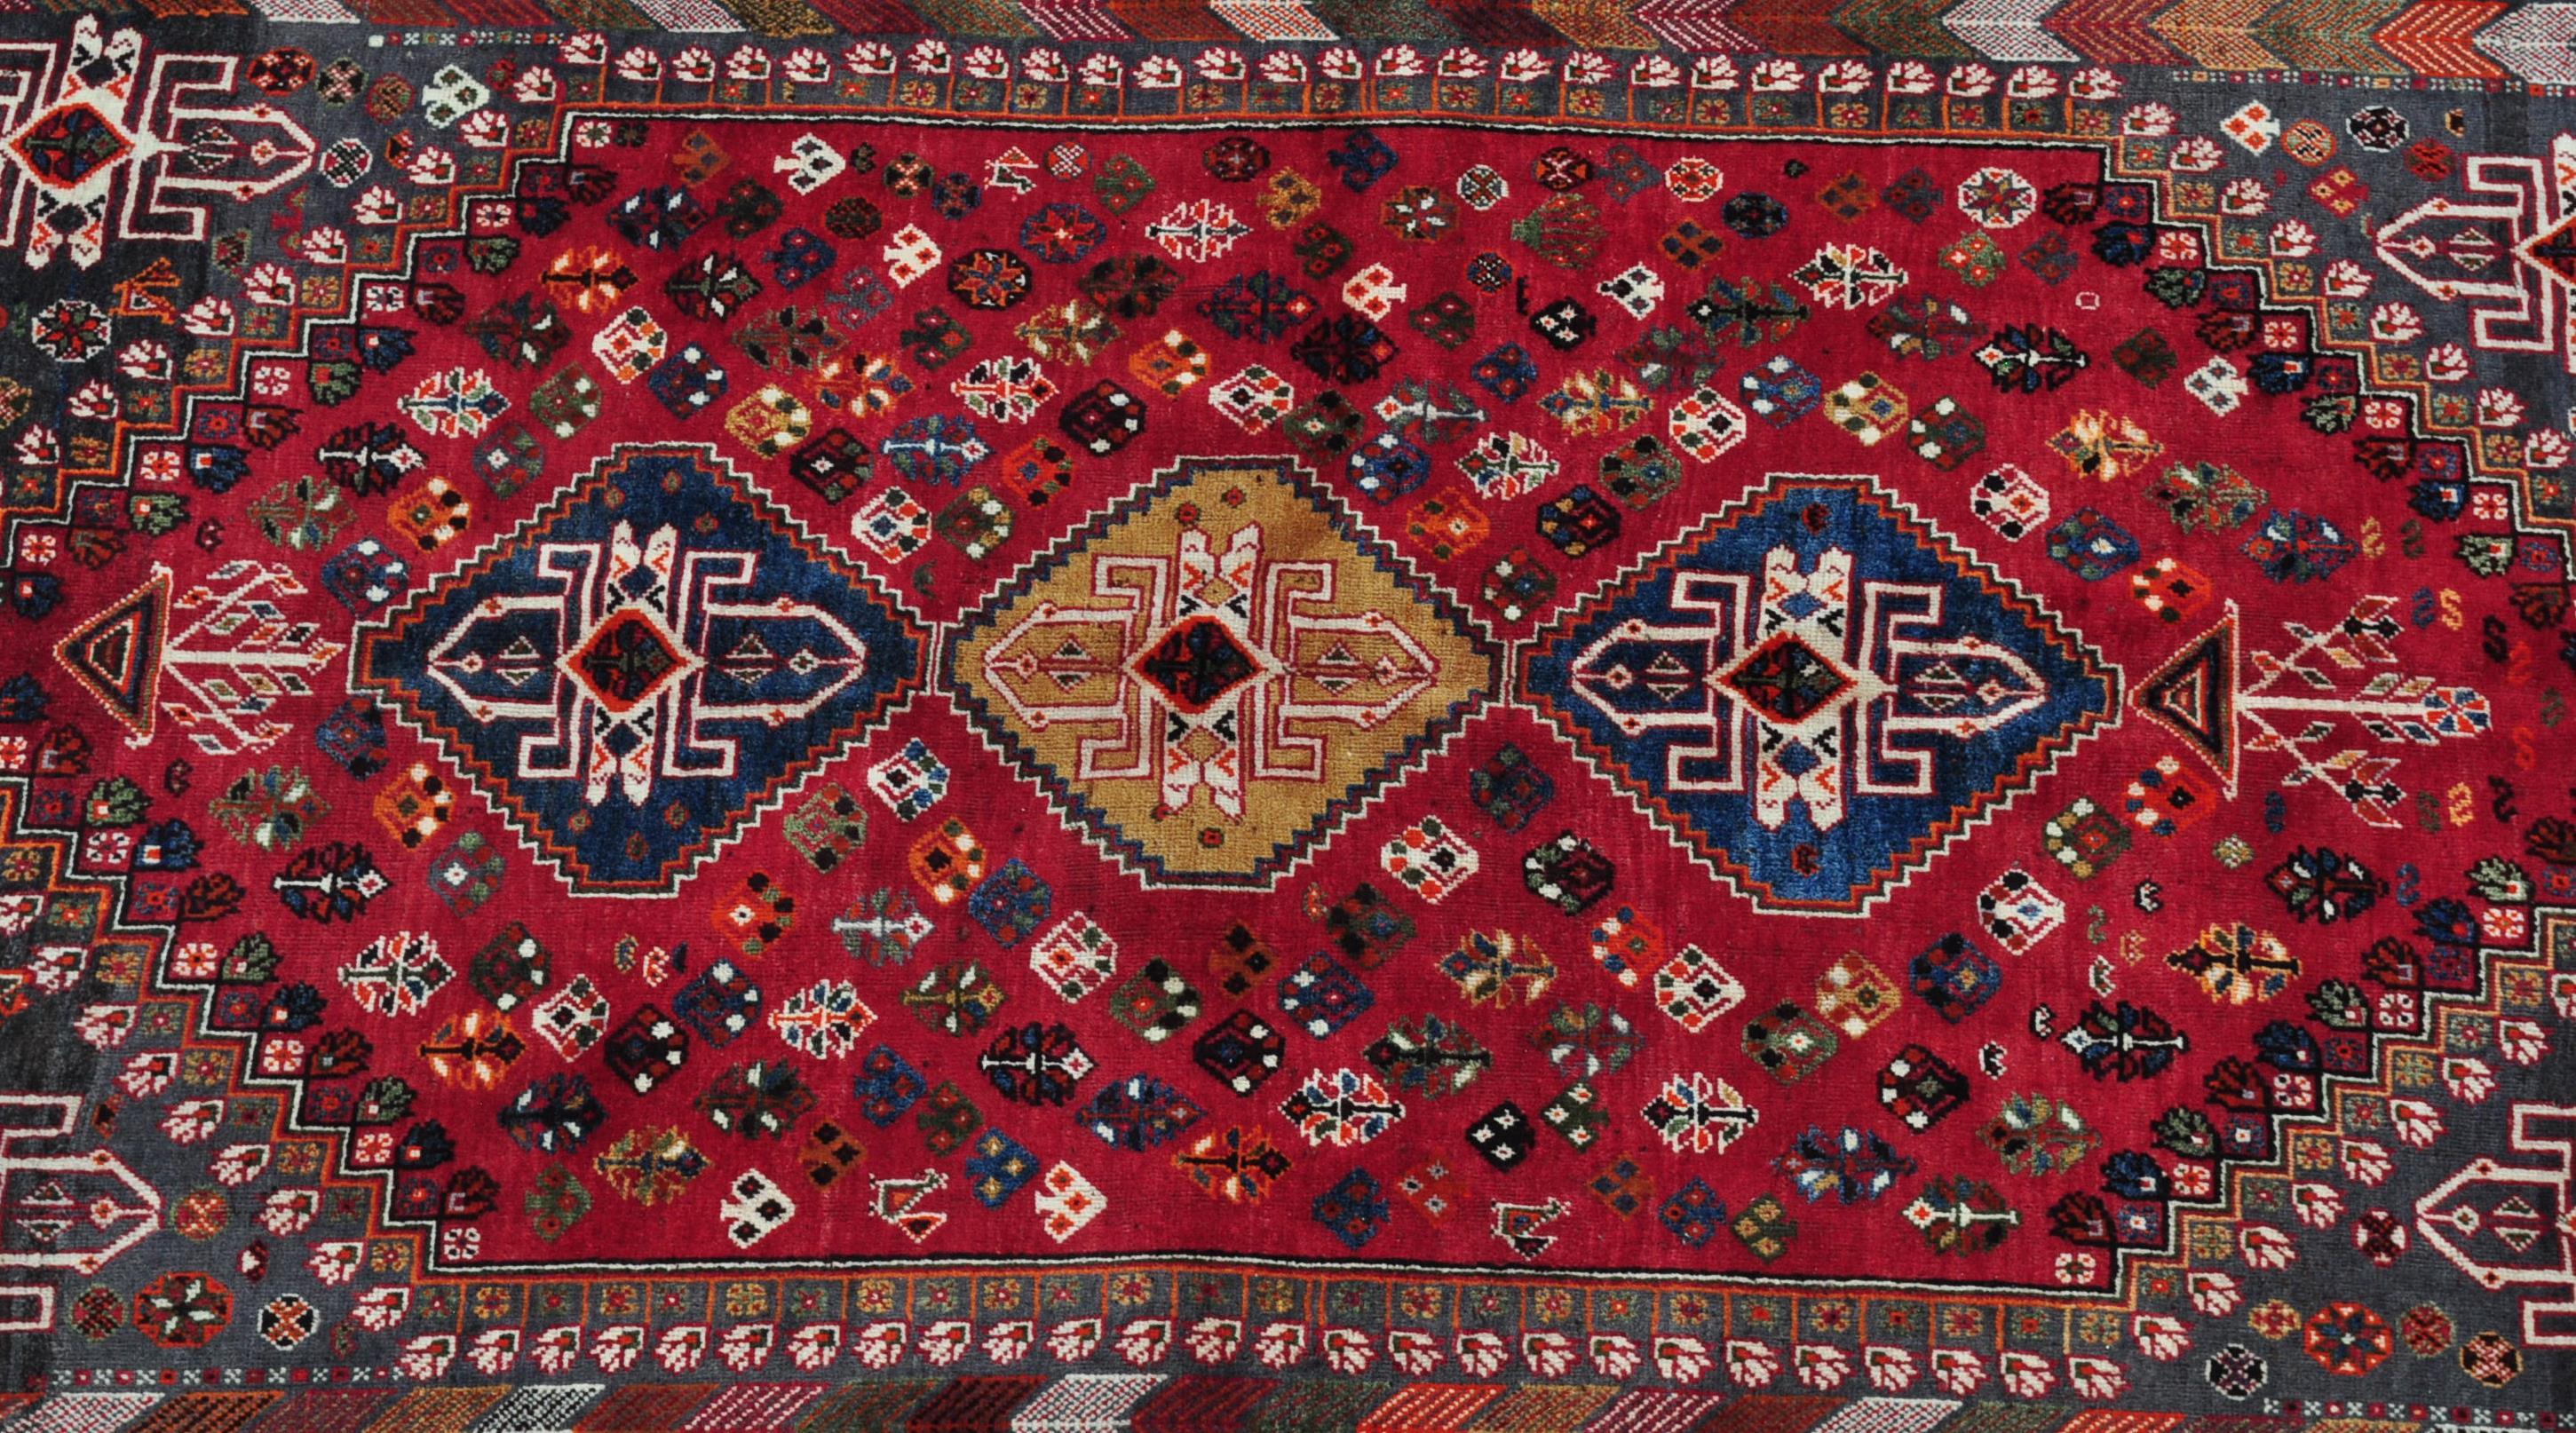 EARLY 20TH CENTURY WOOL ON WOOL HAND KNOTTED PERSIAN ISLAMIC QASHGAI RUG - Image 2 of 4